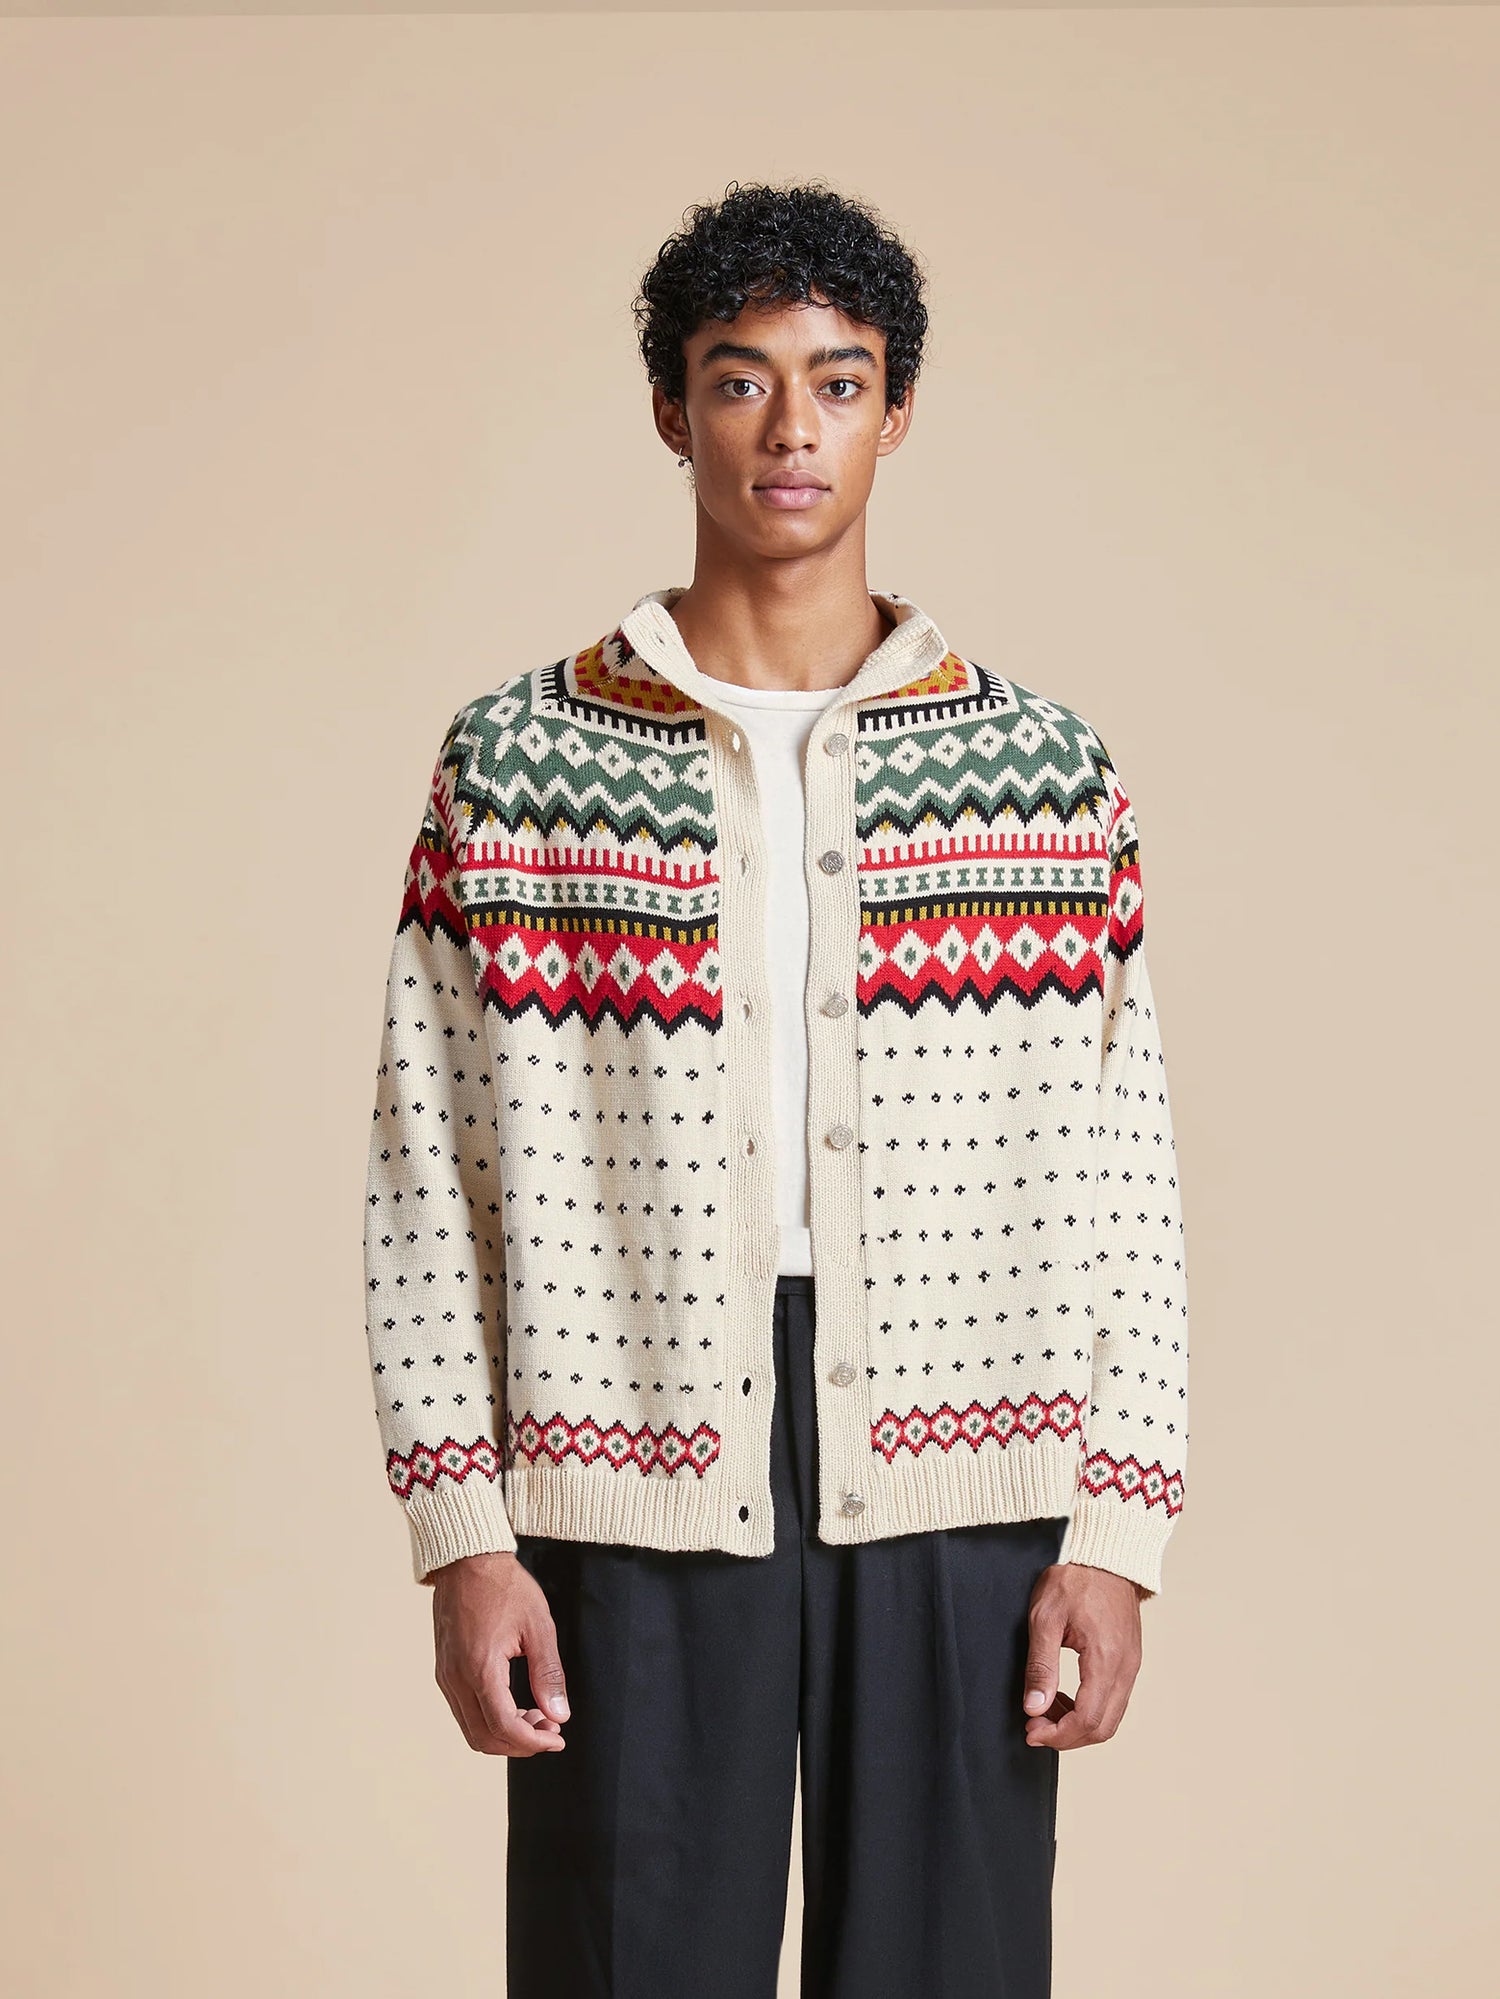 A man donning a Harwan Isles Sweater from Found, a Scottish fair isle knitted cardigan with intricate patterns, paired with trousers.